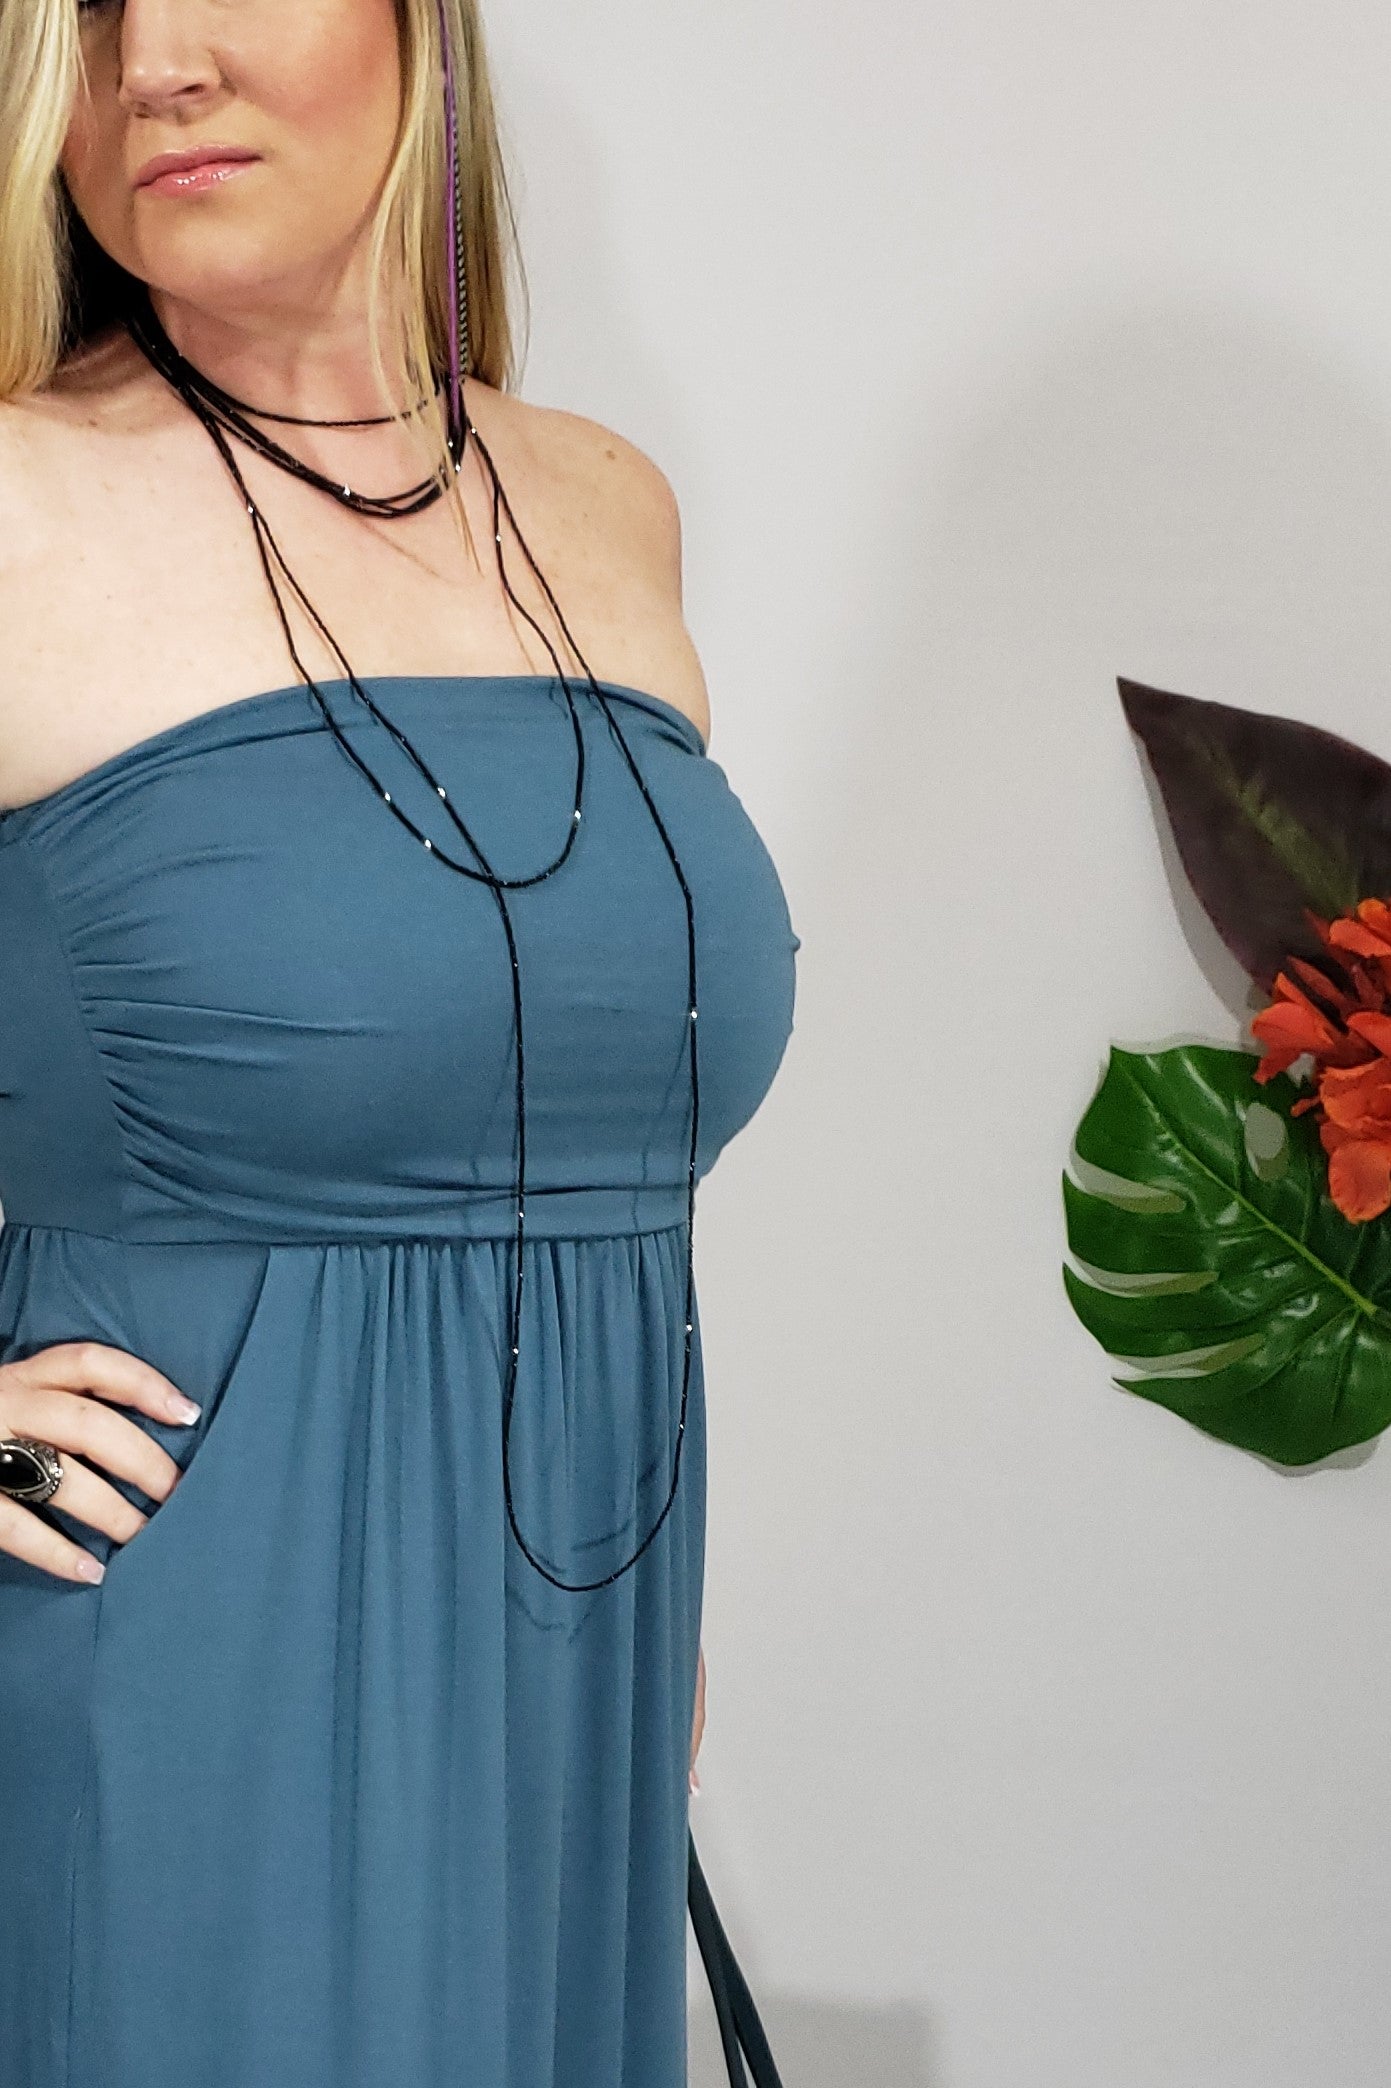 A Pocket Full of Delights Maxi Tube Dress in Titanium - Houzz of DVA Boutique